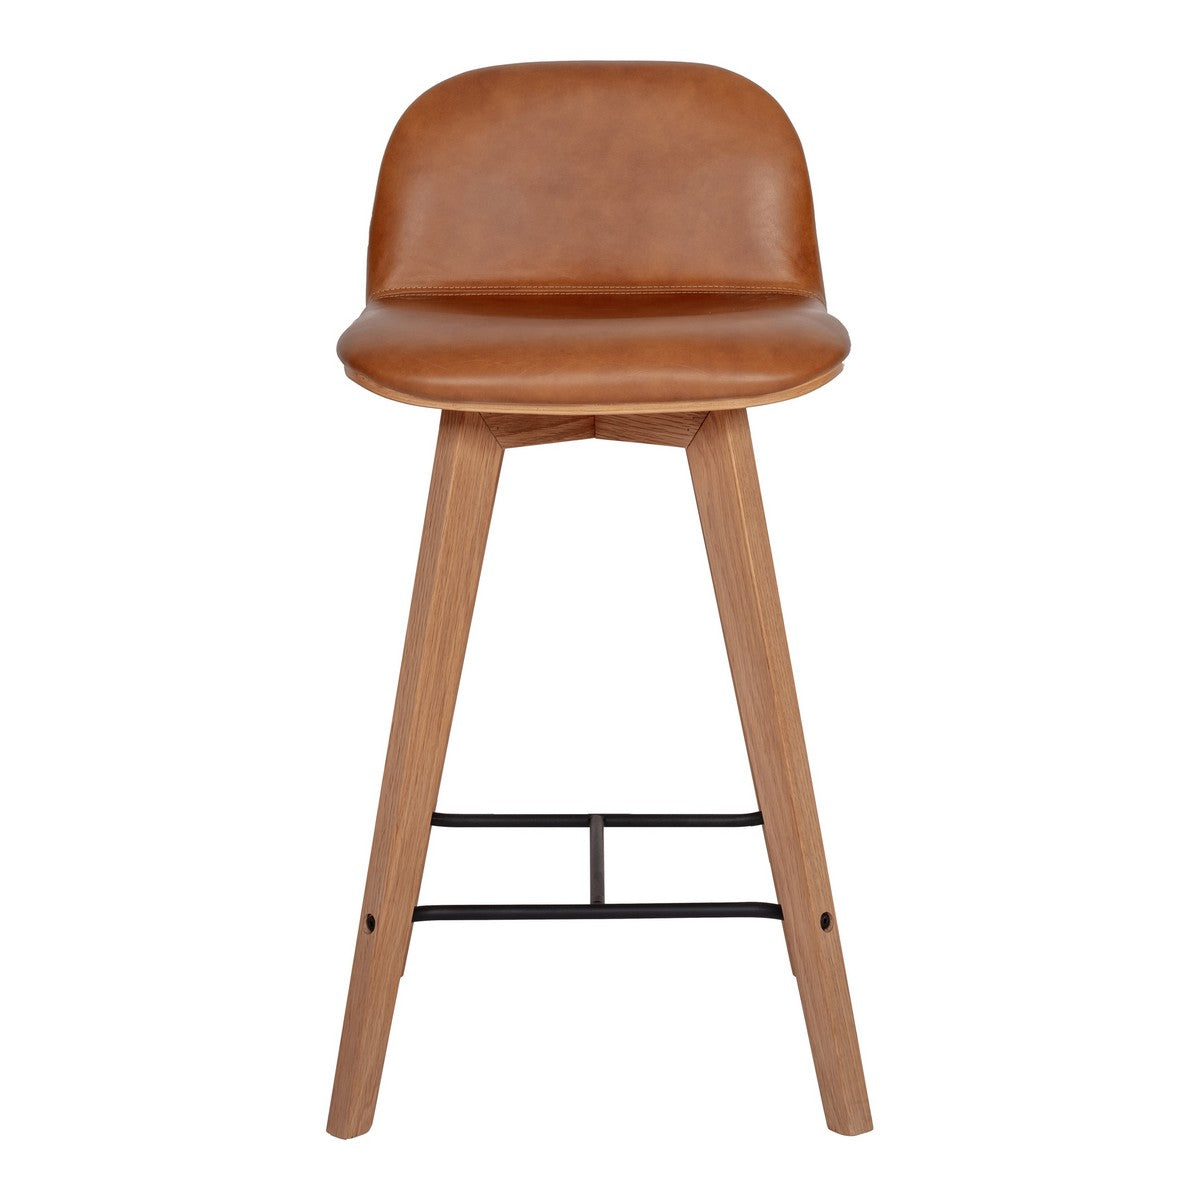 Moe's Home Collection Napoli Leather Counter Stool Tan - YC-1020-40 - Moe's Home Collection - Counter Stools - Minimal And Modern - 1